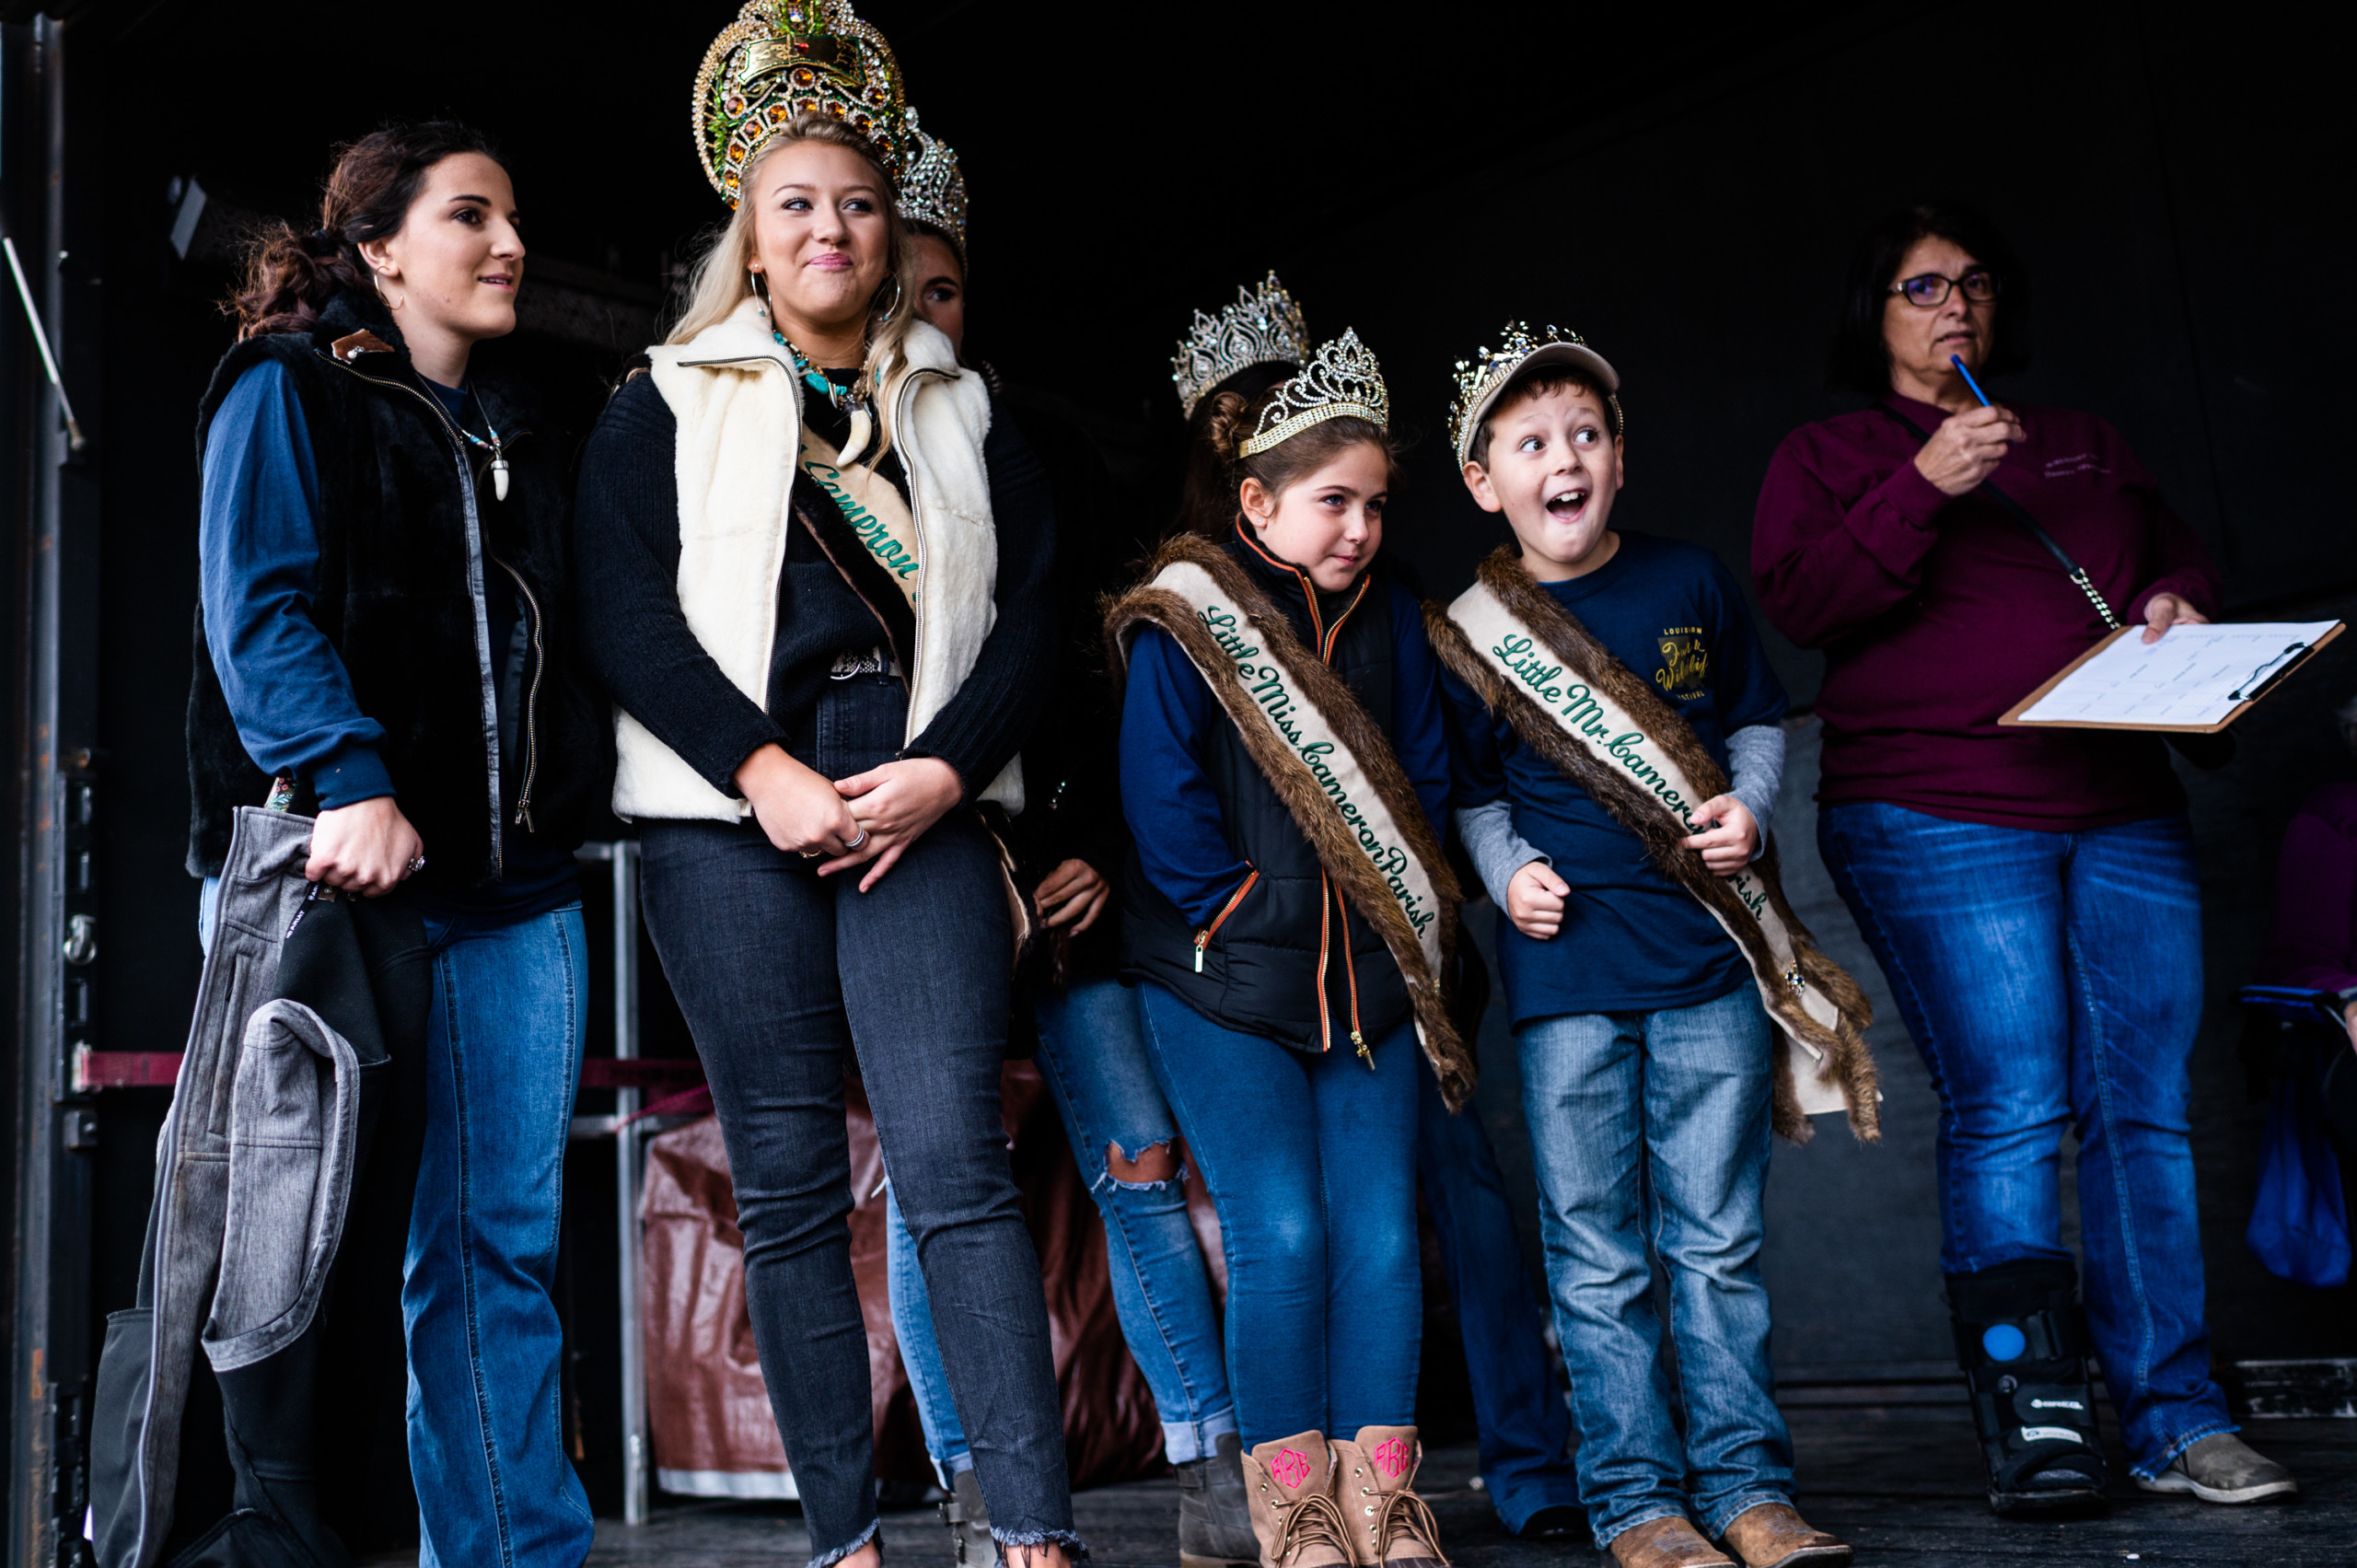 Festival royalty reacts to the nutria skinning competition